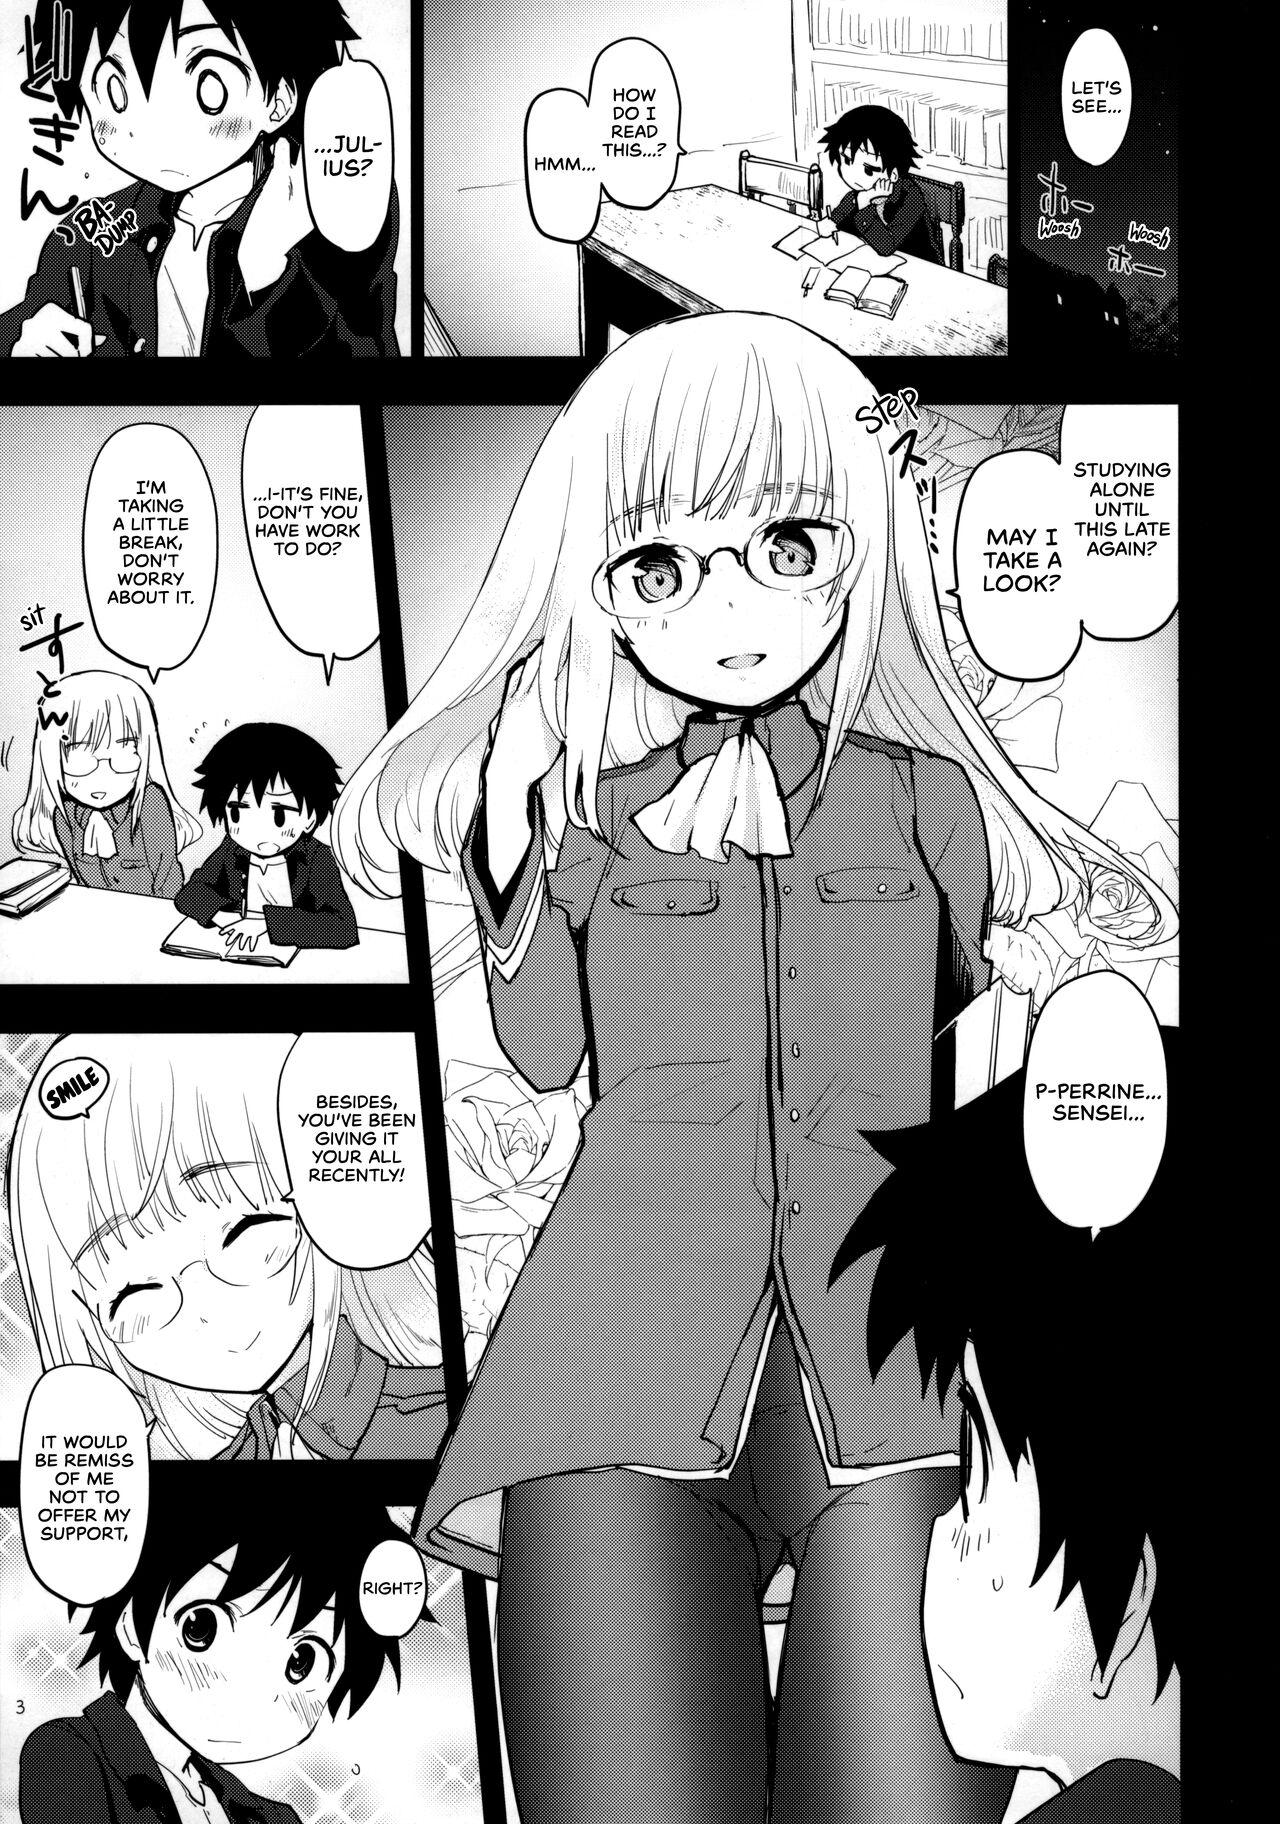 Highschool PRIVATE LESSON - Strike witches Butts - Page 2